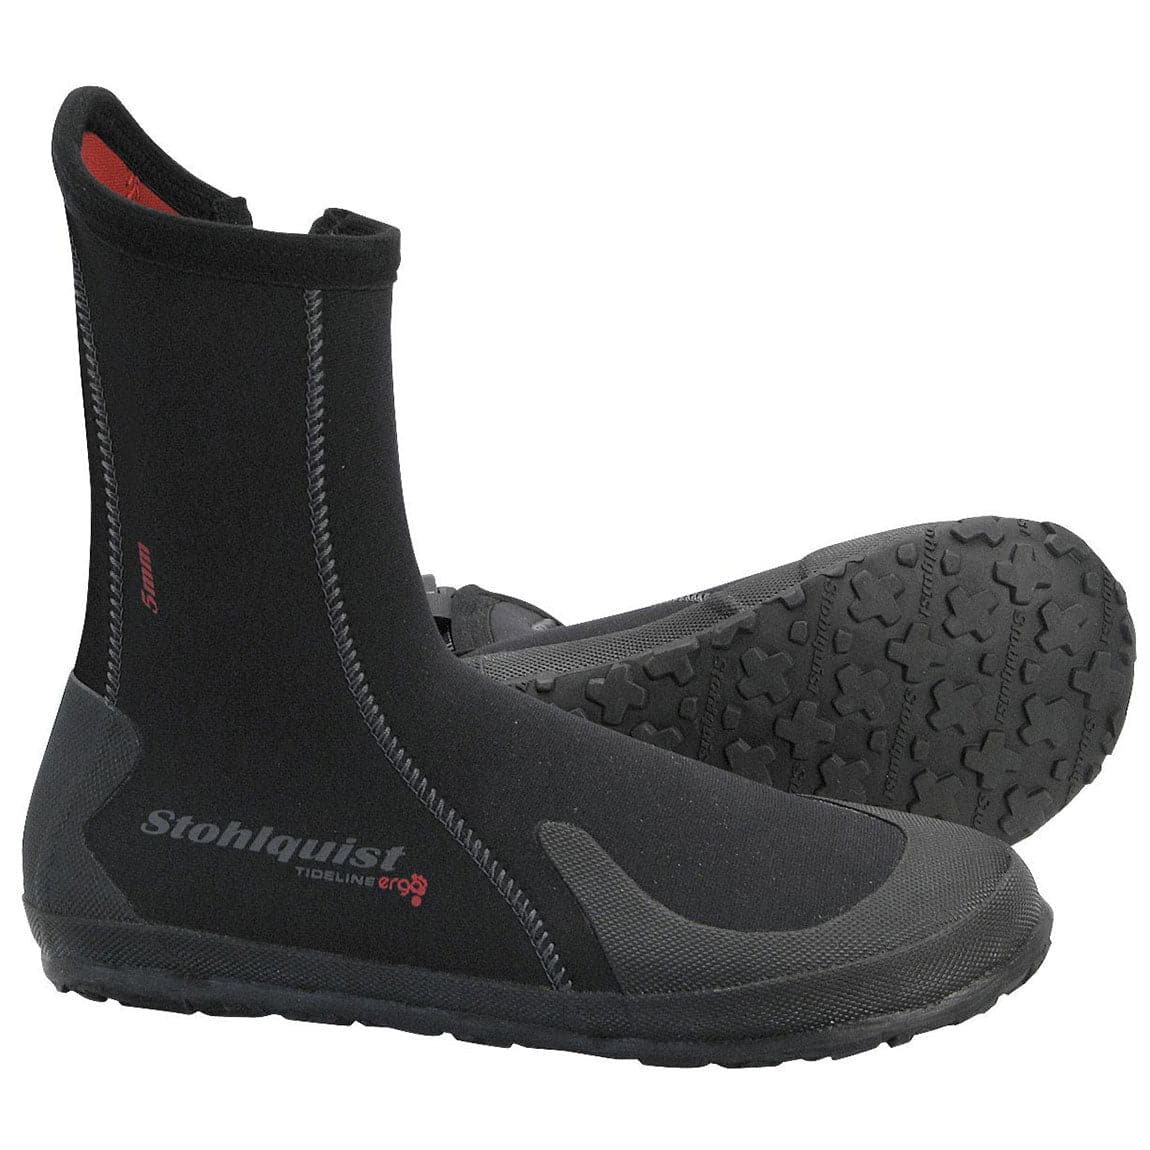 Featuring the Tideline Bootie men's footwear, women's footwear manufactured by Stohlquist shown here from one angle.